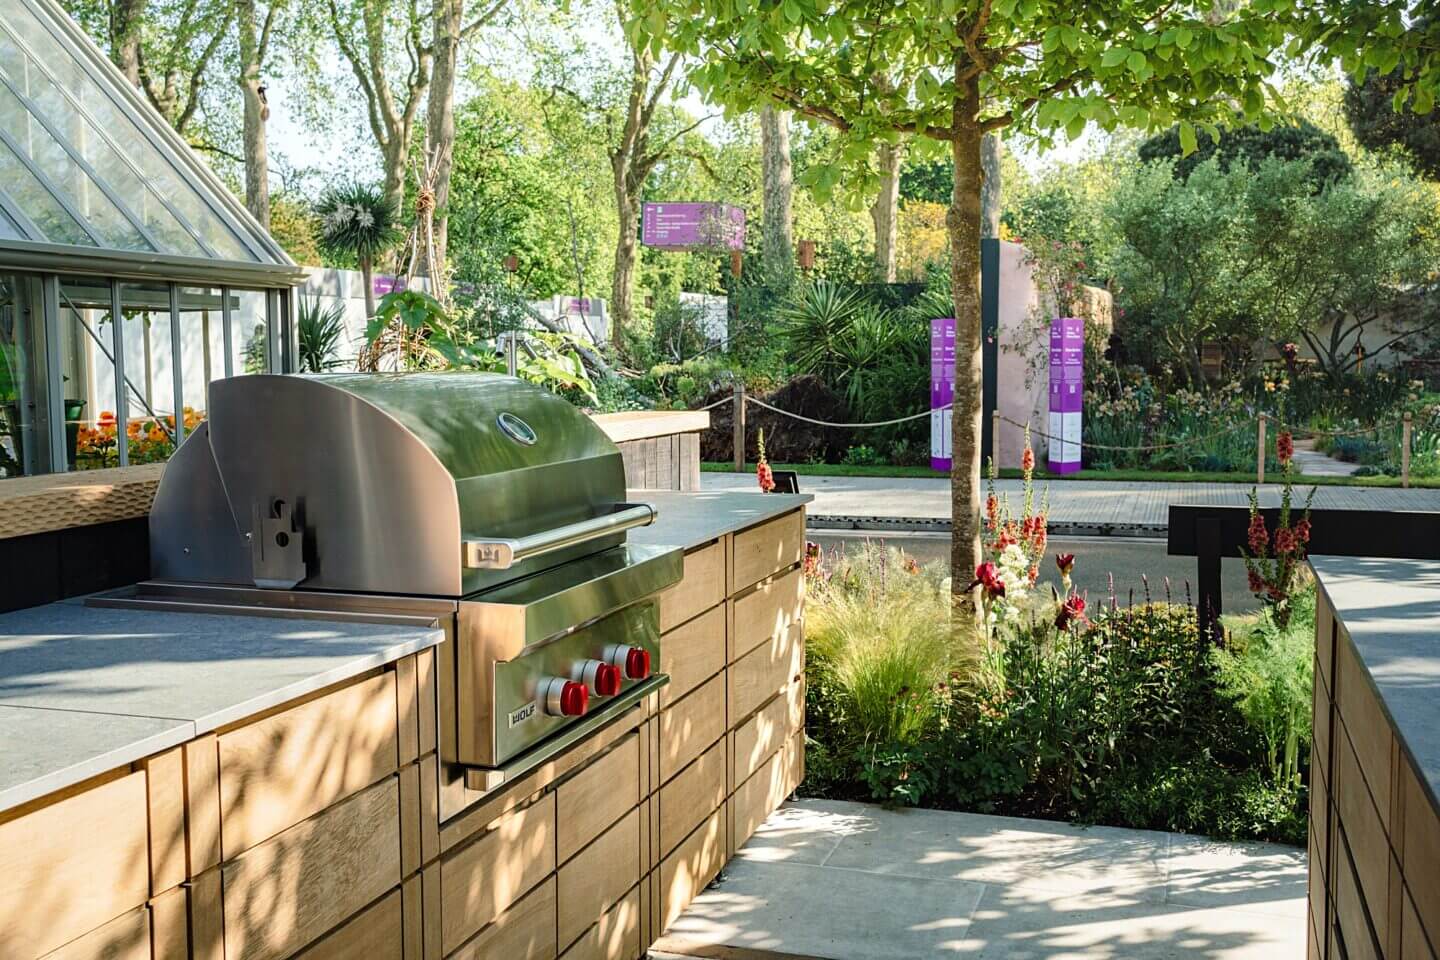 Outdoor kitchen with grill displayed by Gaze Burvill at Chelsea Flower Show